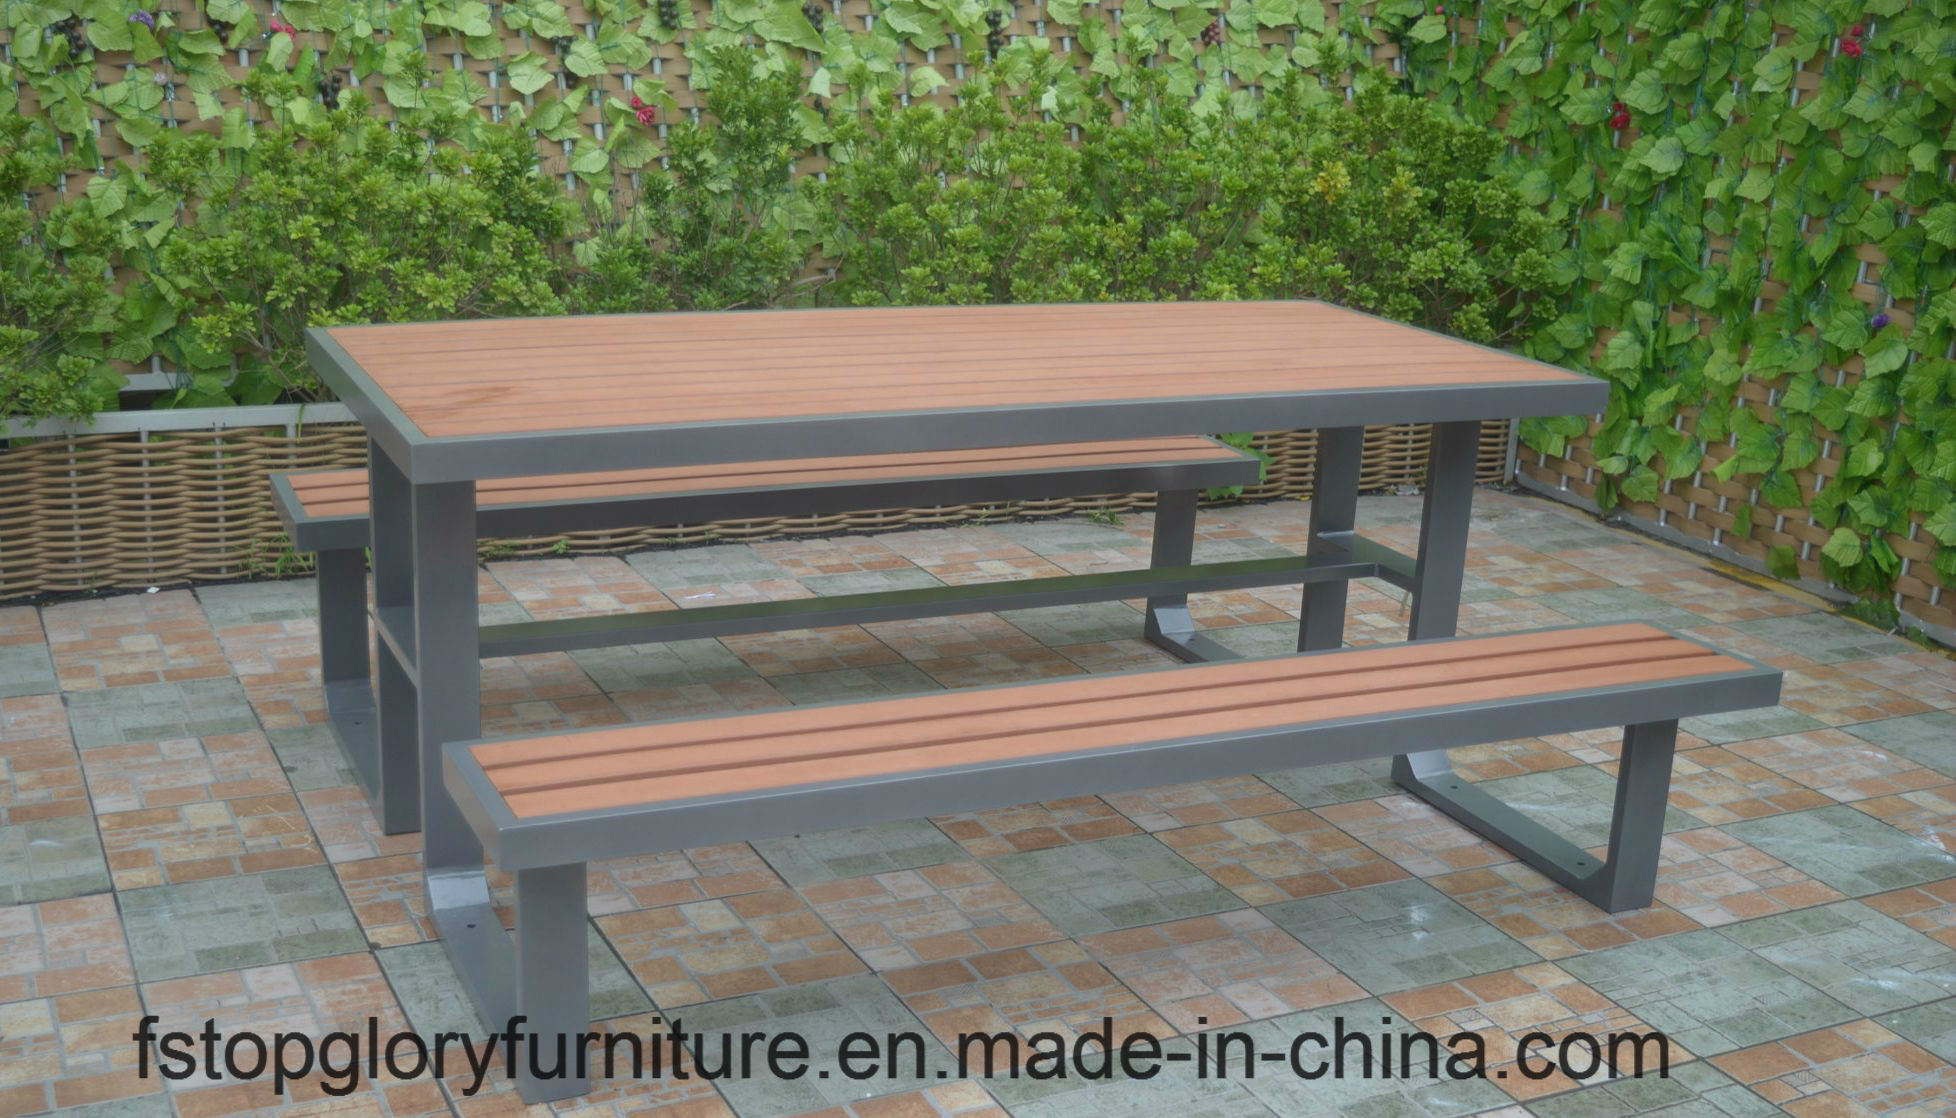 2018 New Design Plastic Wood Material Outdoor Table Chair